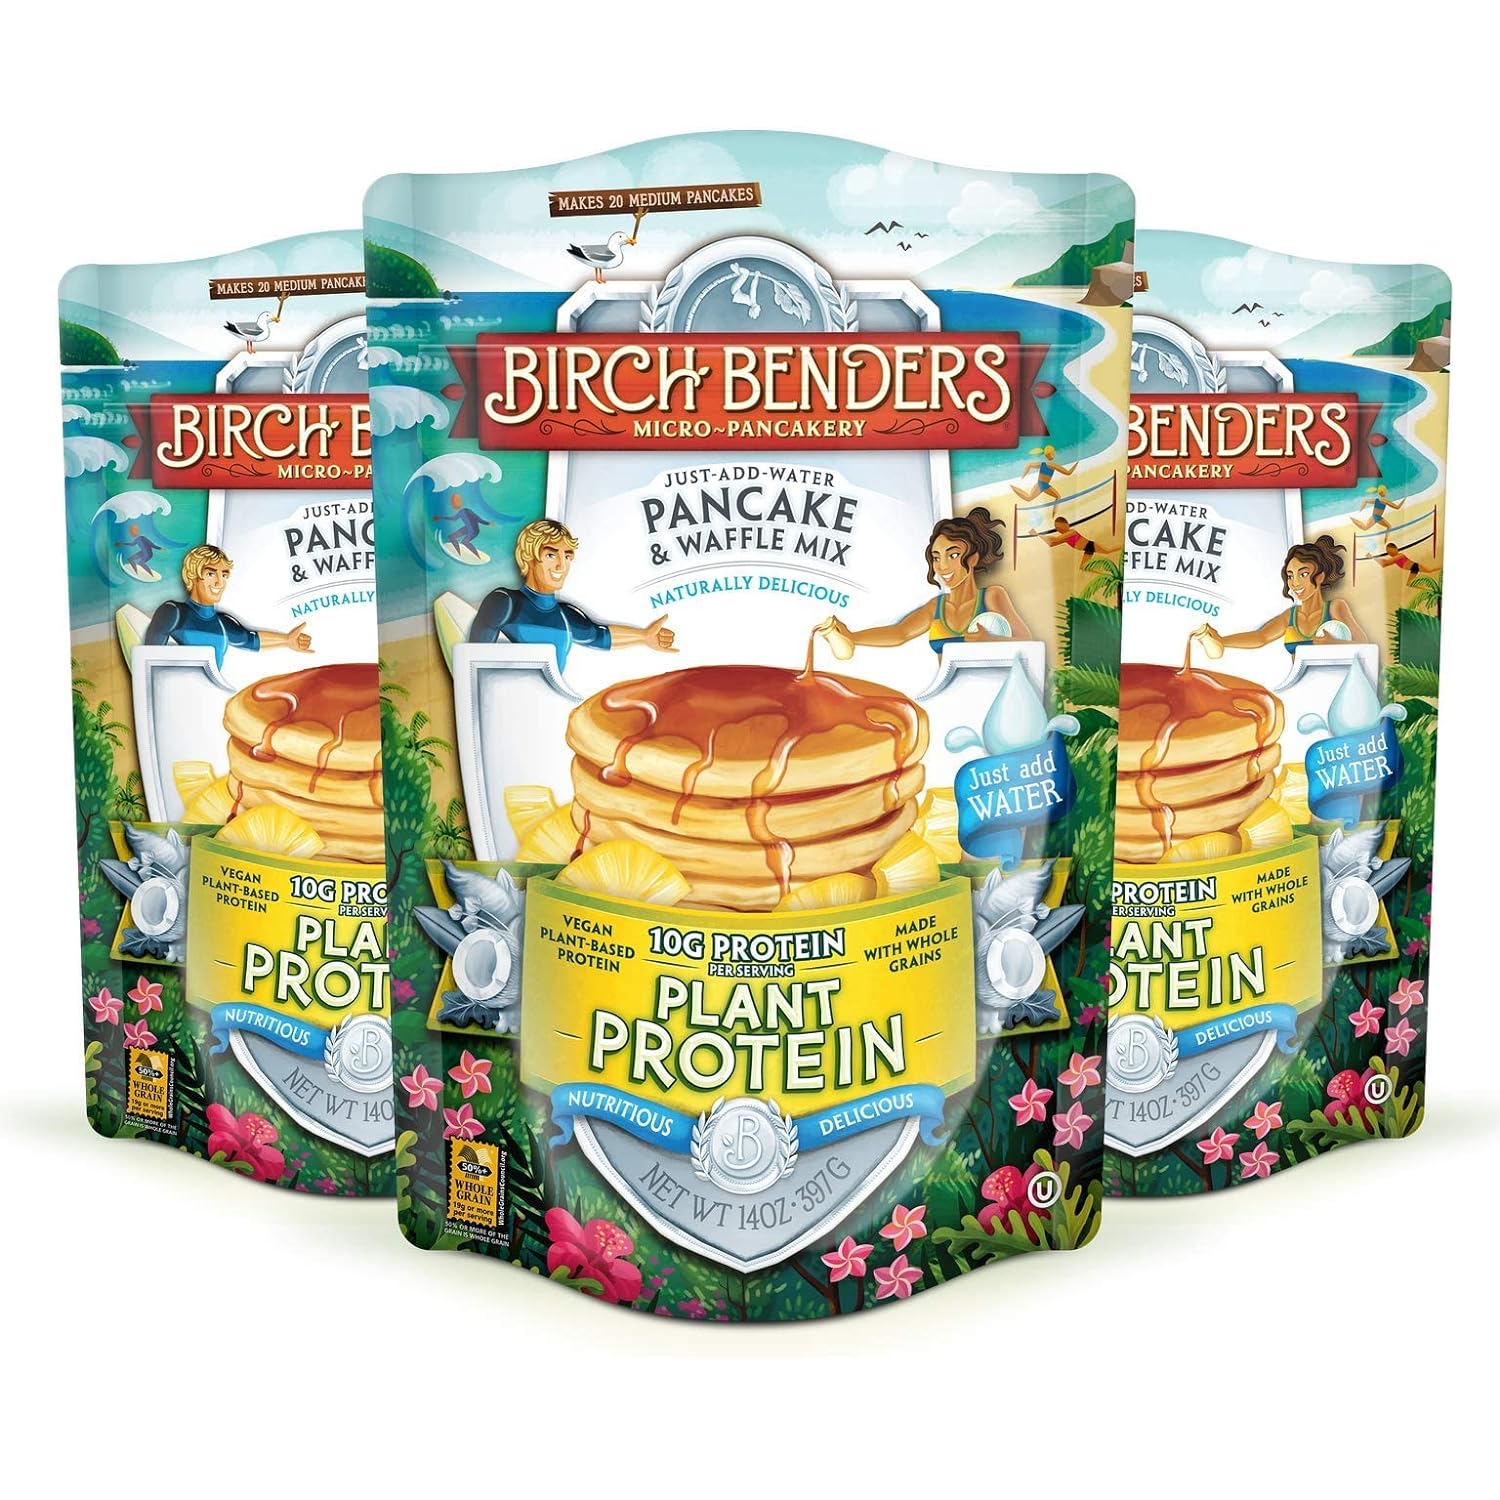 Birch Benders Plant Protein Pancake & Waffle Mix, Vegan, 9 g Plant-Based Protein, Whole Grains, Just Add Water 14 oz (Pack of 3)